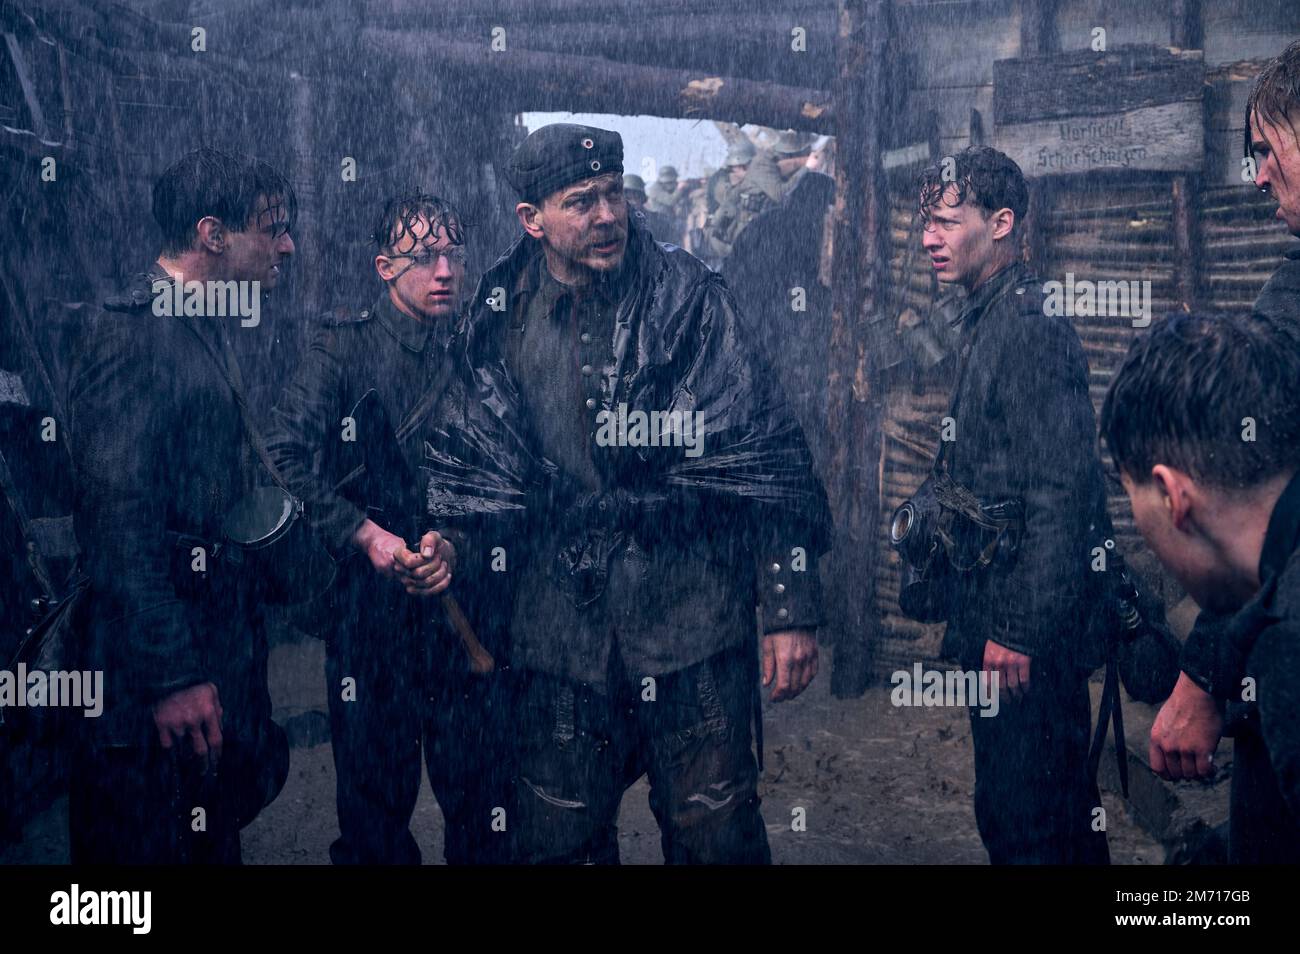 RELEASE DATE: October 28, 2022. TITLE: All Quiet On The Wester Front. STUDIO: Netflix. DIRECTOR: Edward Berger. PLOT: A young German soldier's terrifying experiences and distress on the western front during World War I. STARRING: FELIX KAMMERER as Paul Baumer. (Credit Image: © Netflix/Entertainment Pictures) Stock Photo